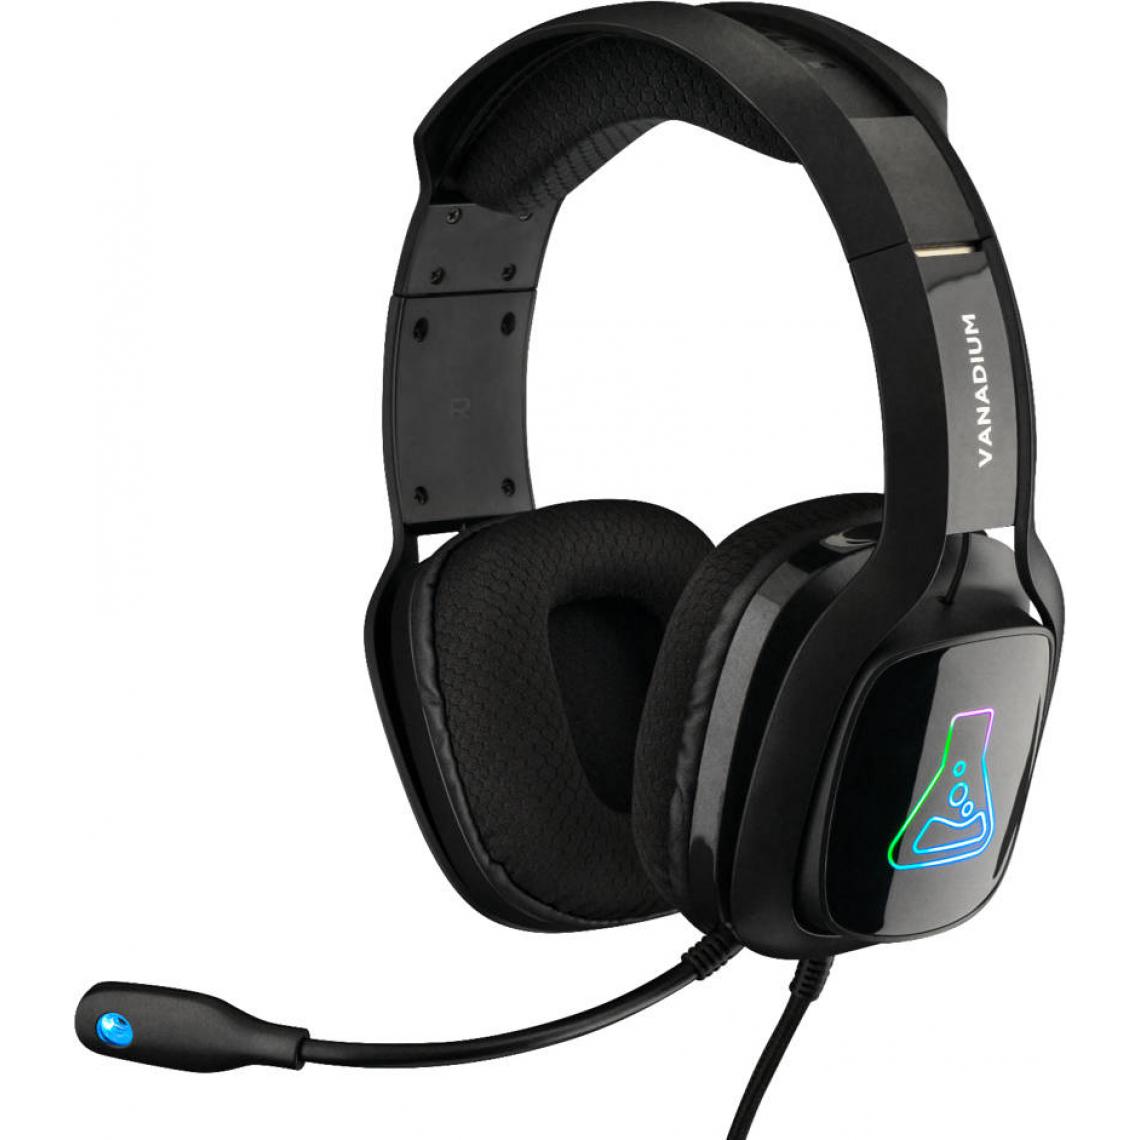 The G-Lab - Casque RGB Gaming - PC, PlayStation Xbox - Noir - Micro-Casque